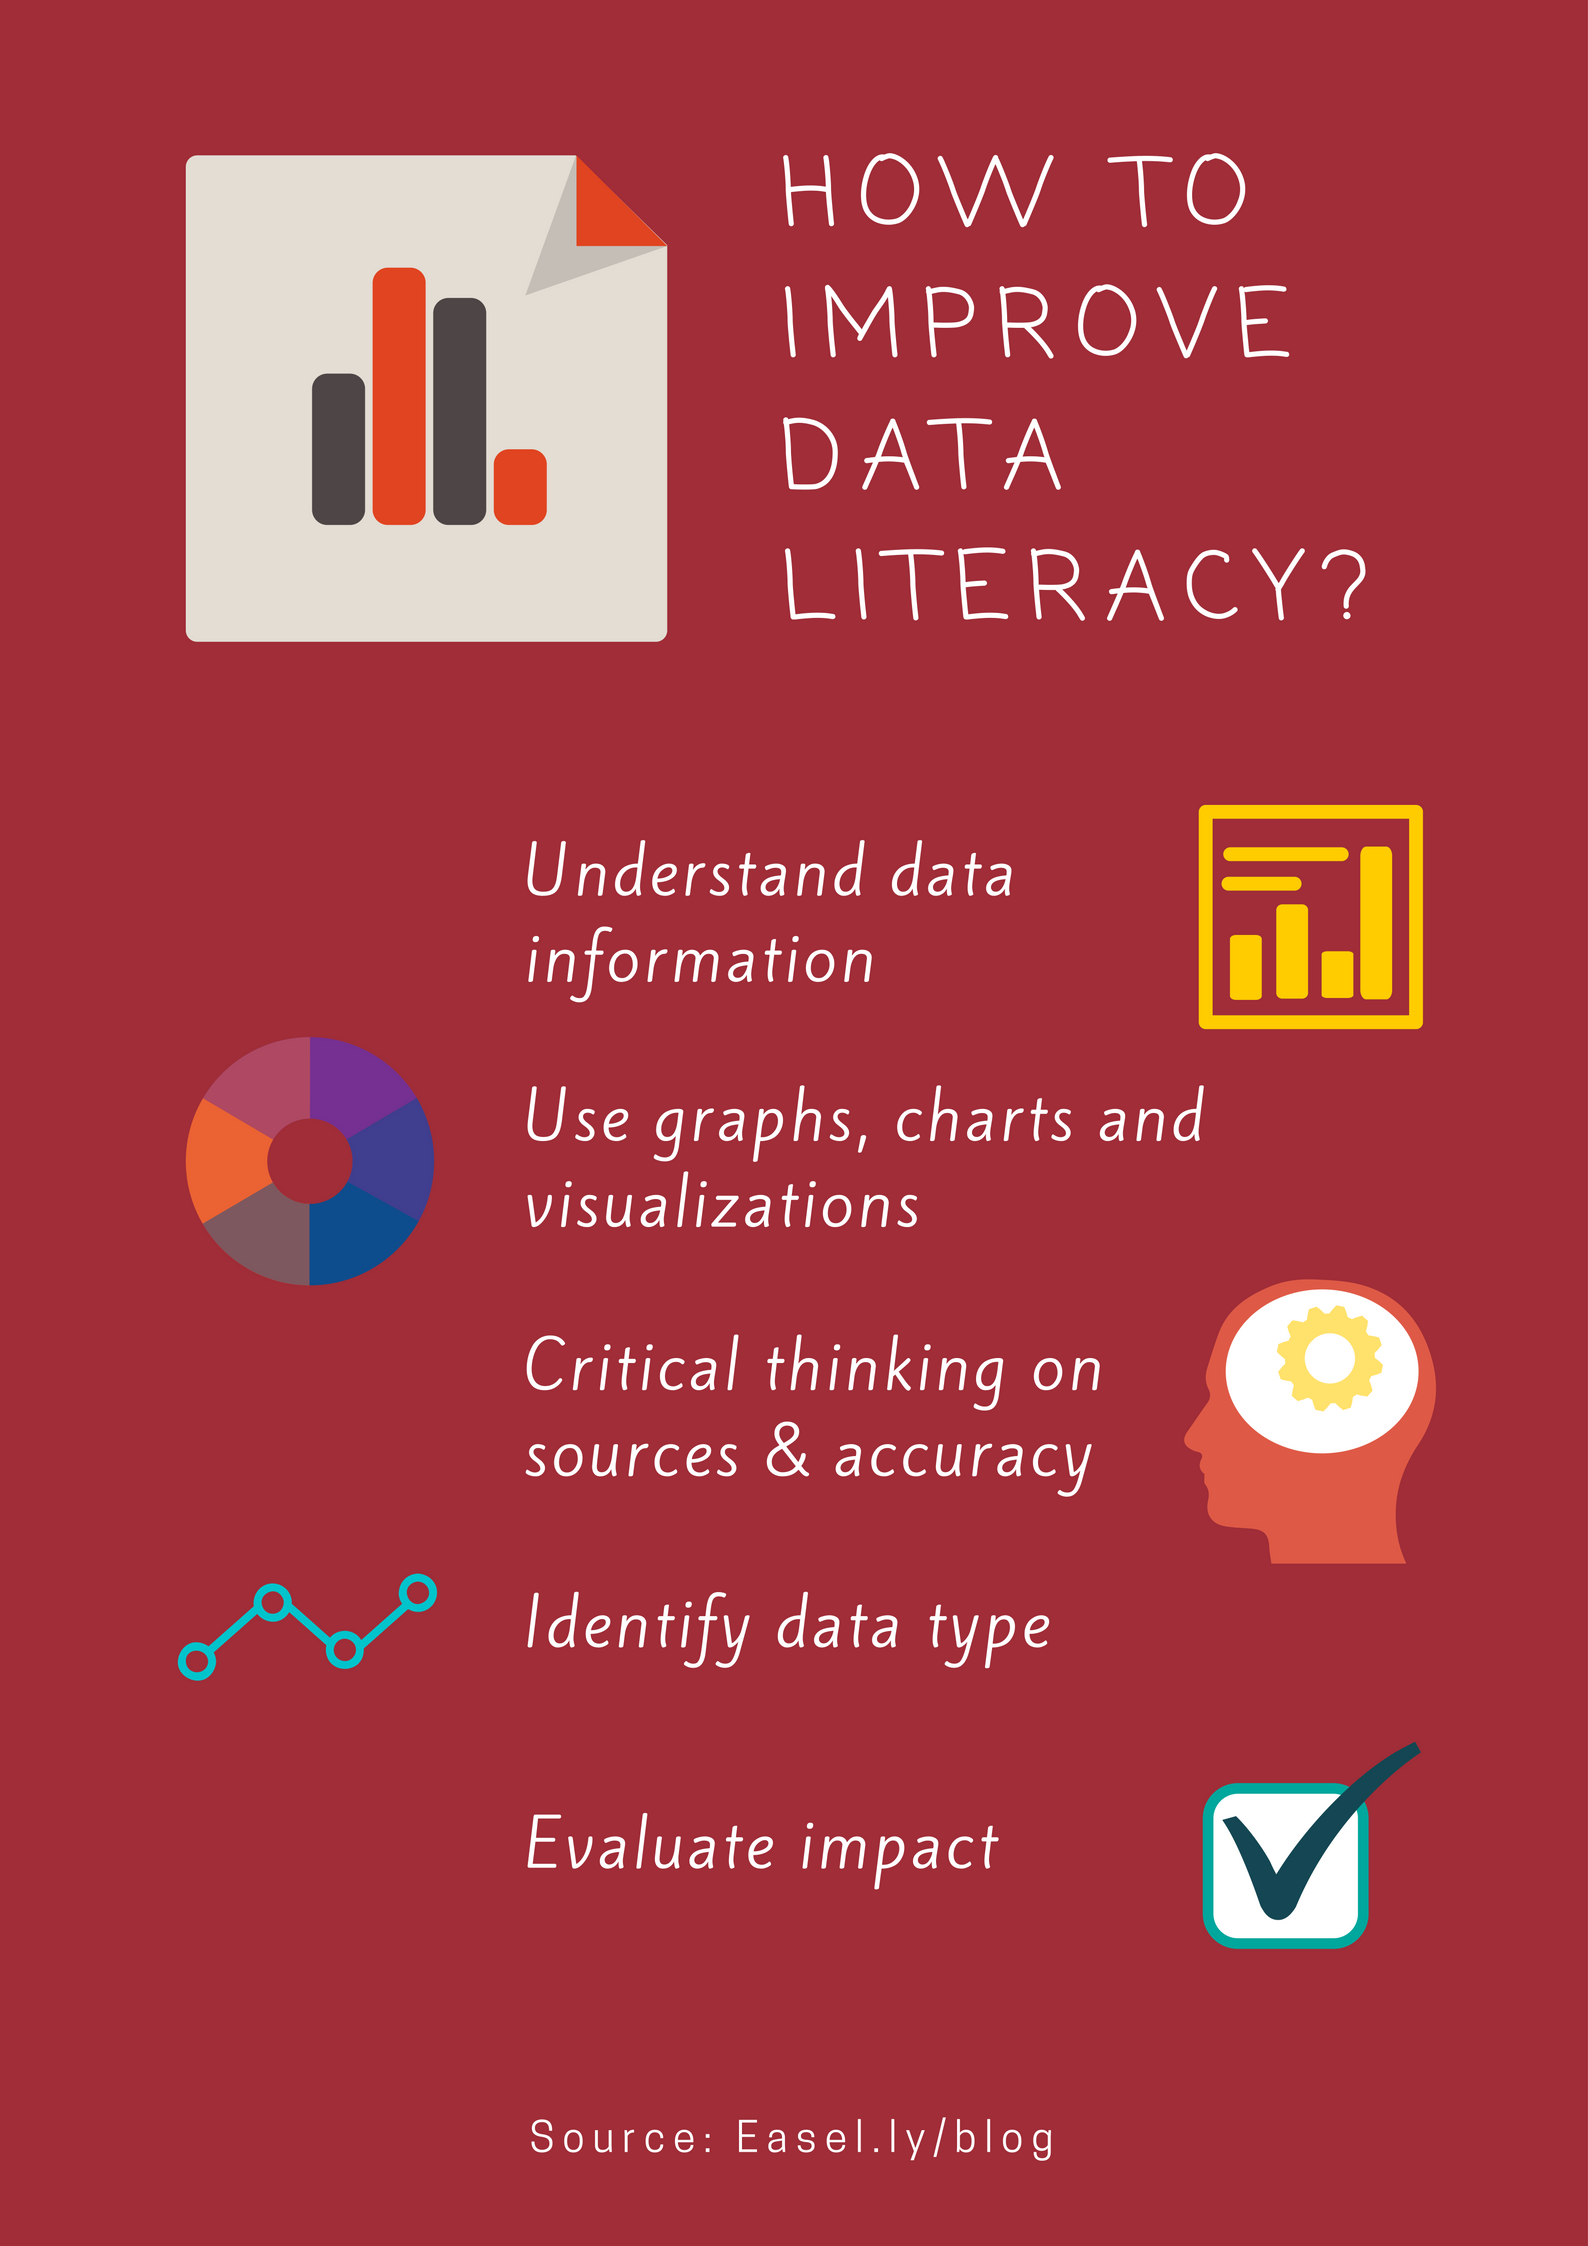 How to improve data literacy